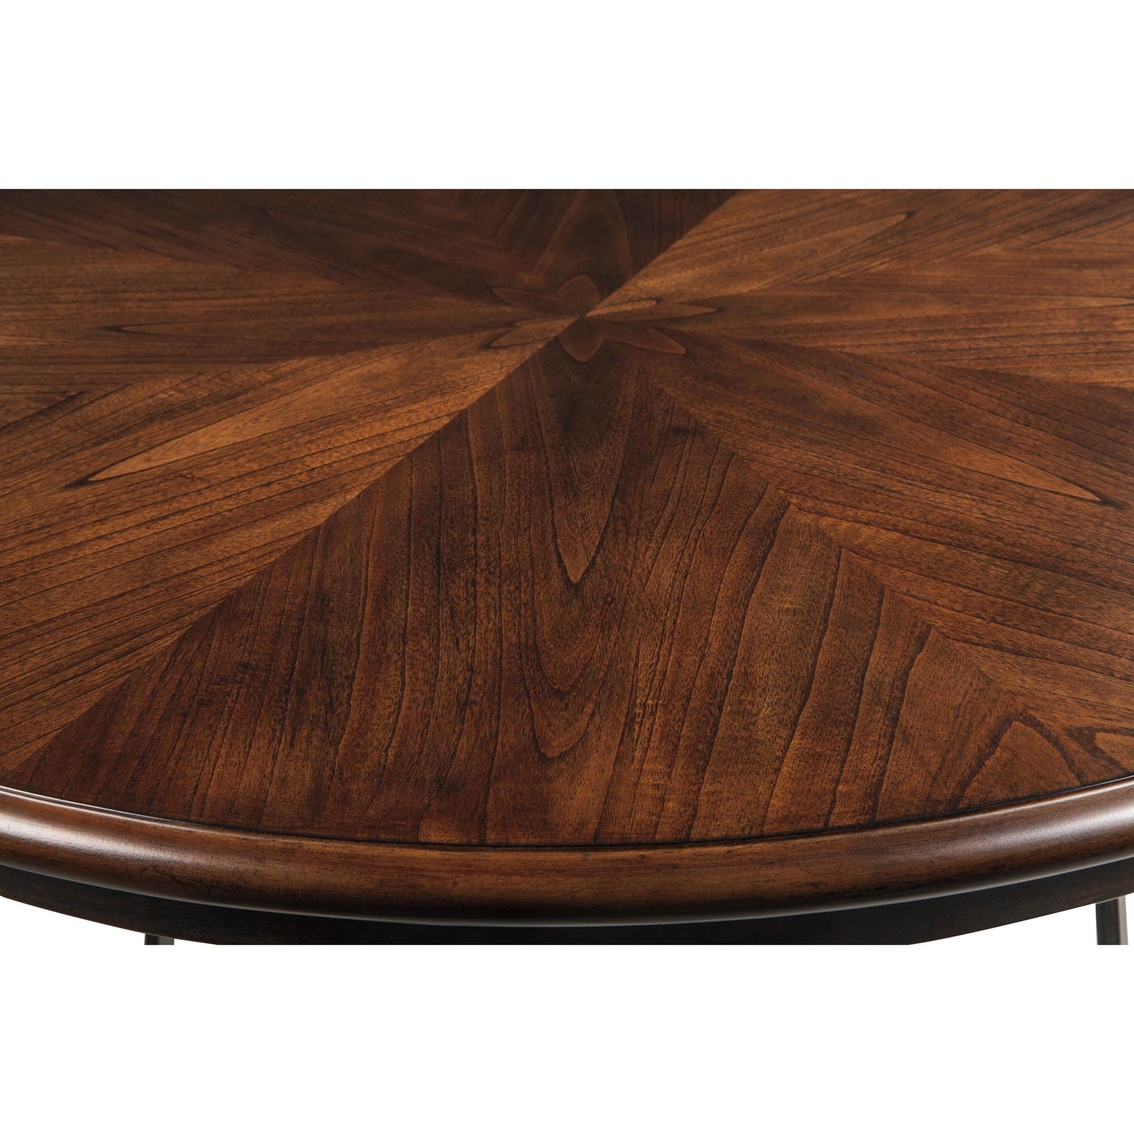 Signature Design by Ashley Centiar Round Dining Room Table - Image 2 of 4